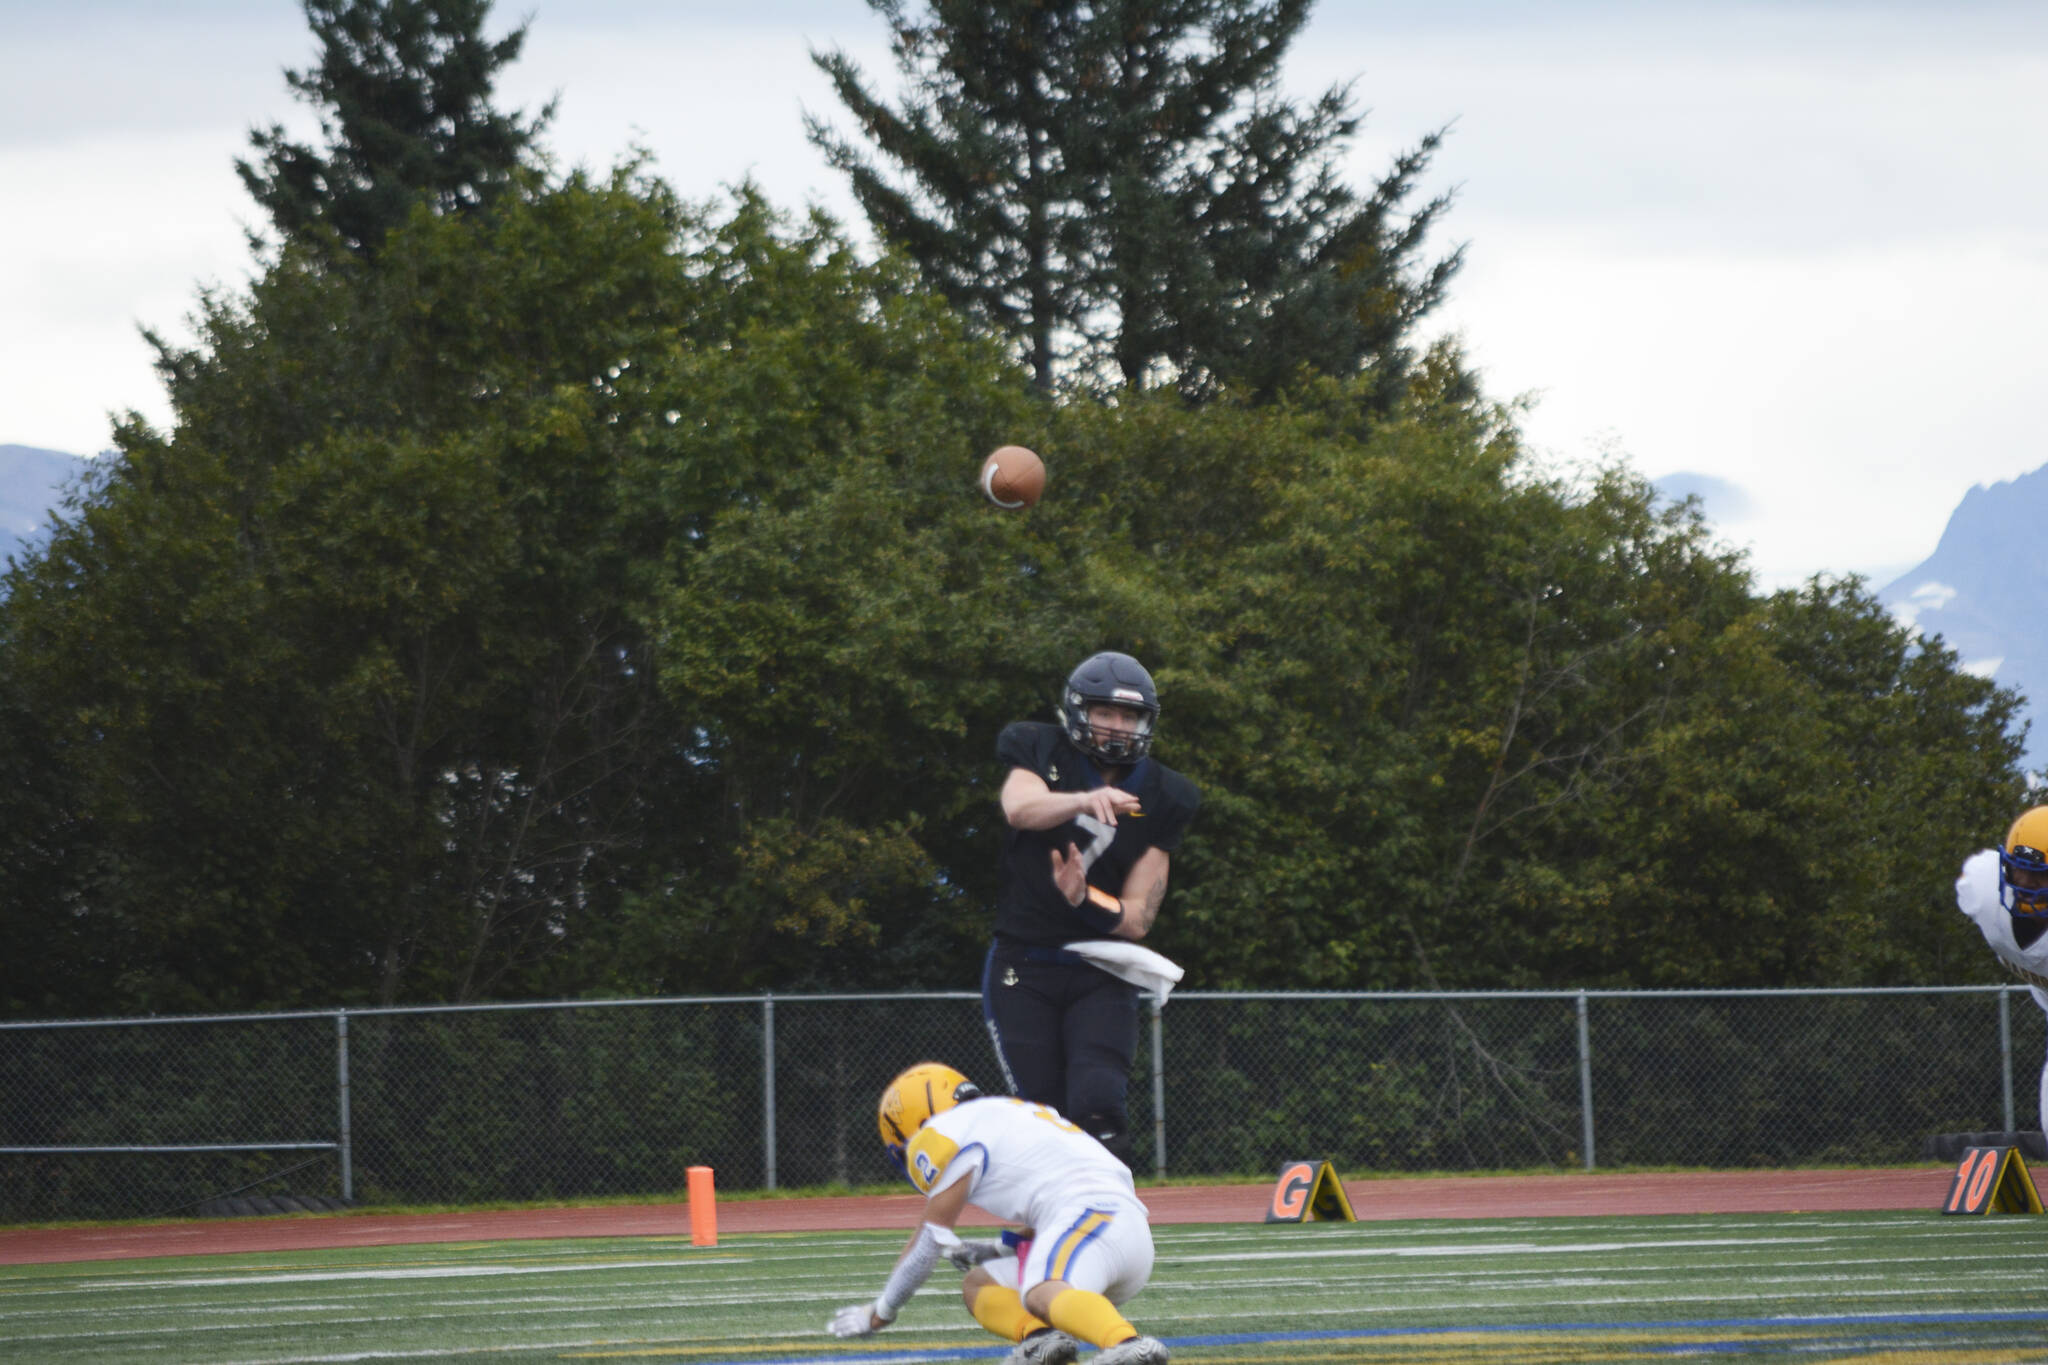 Mariner quarterback Carter Tennison drills the ball to Morgan Techie on a successful run by Techie to score Homer’s first touchdown at homecoming on Friday, Sept. 16, 2022, in Homer, Alaska. (Photo by Michael Armstrong/Homer News)